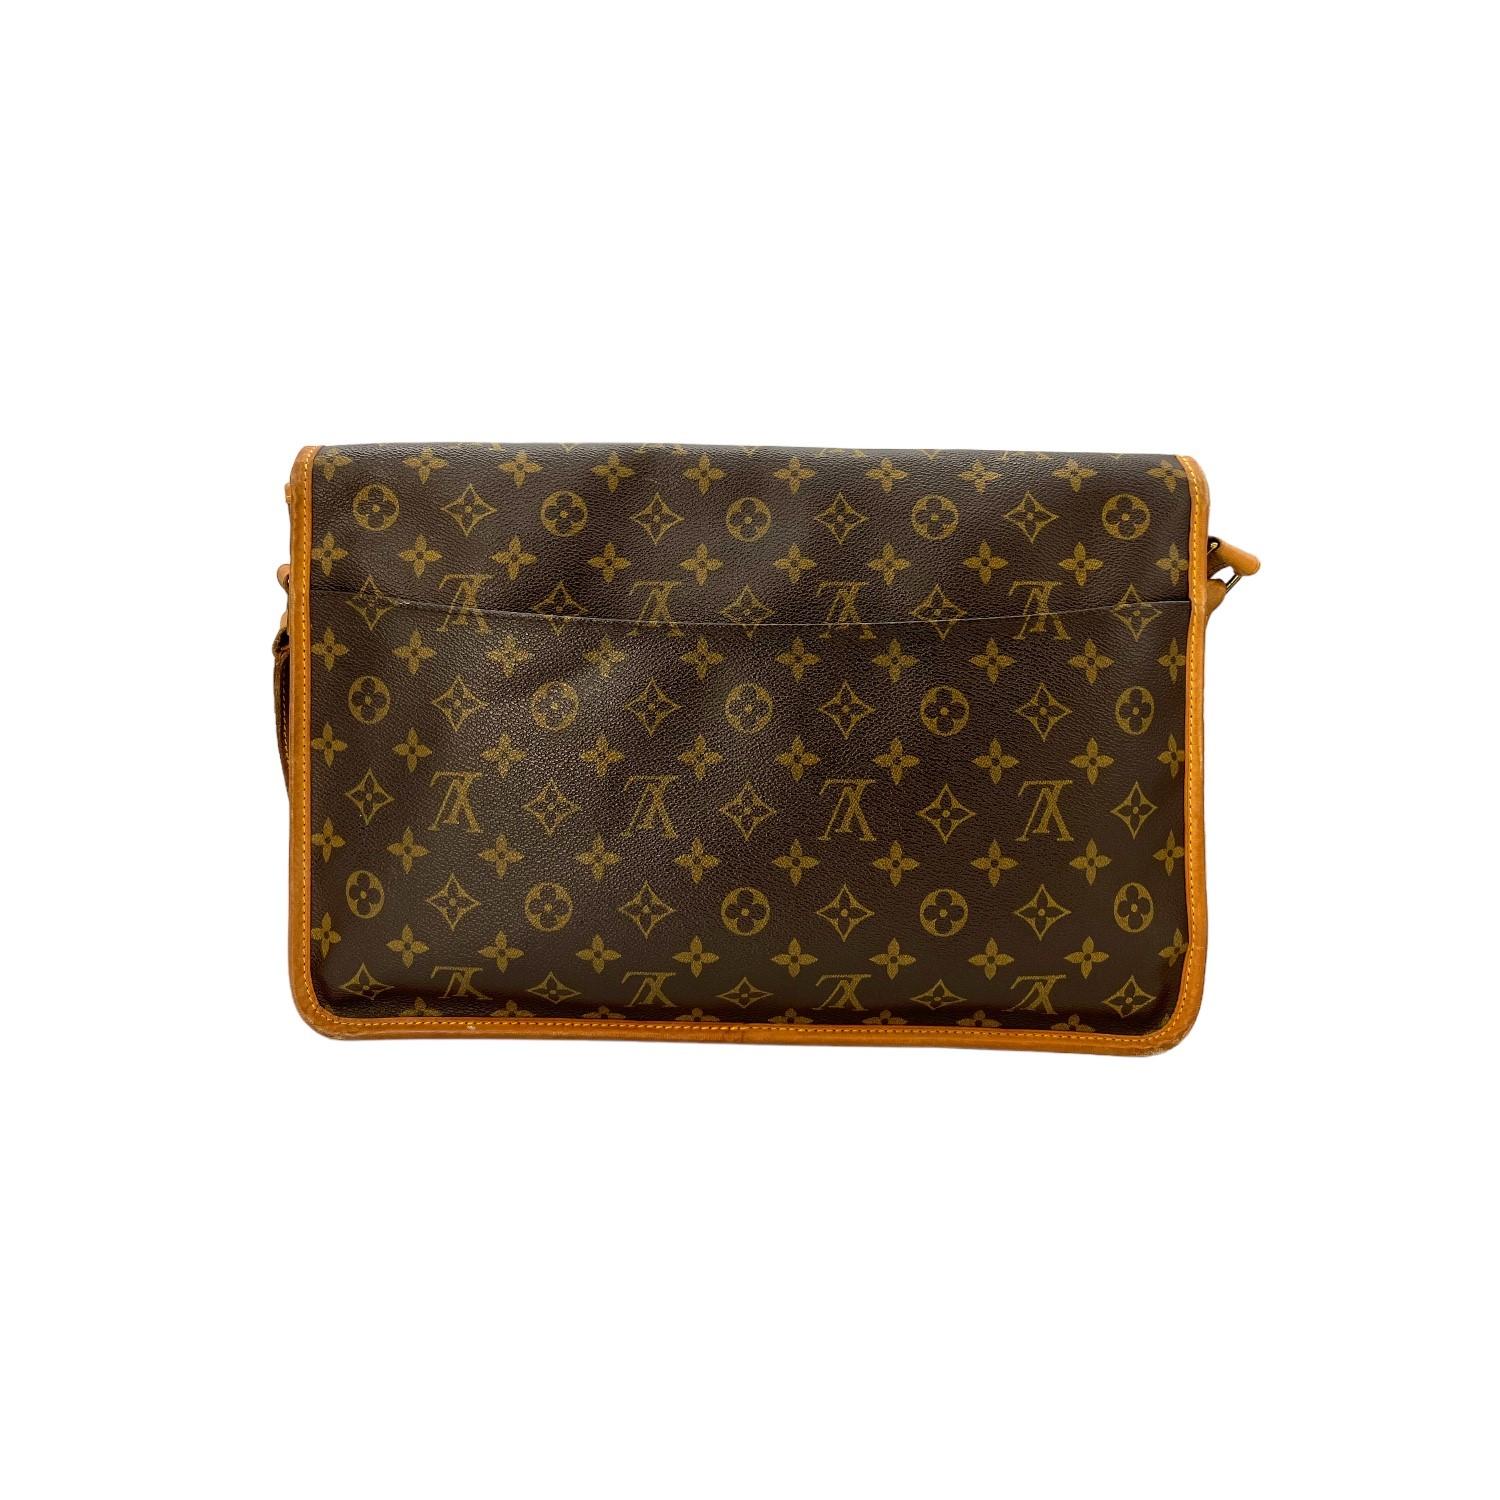 This Louis Vuitton Monogram Sac Gibeciere GM is finely crafted of the classic Louis Vuitton Monogram coated canvas with leather trimming and gold-tone hardware features. It has a flat, adjustable leather shoulder strap. It has a slip pocket on the